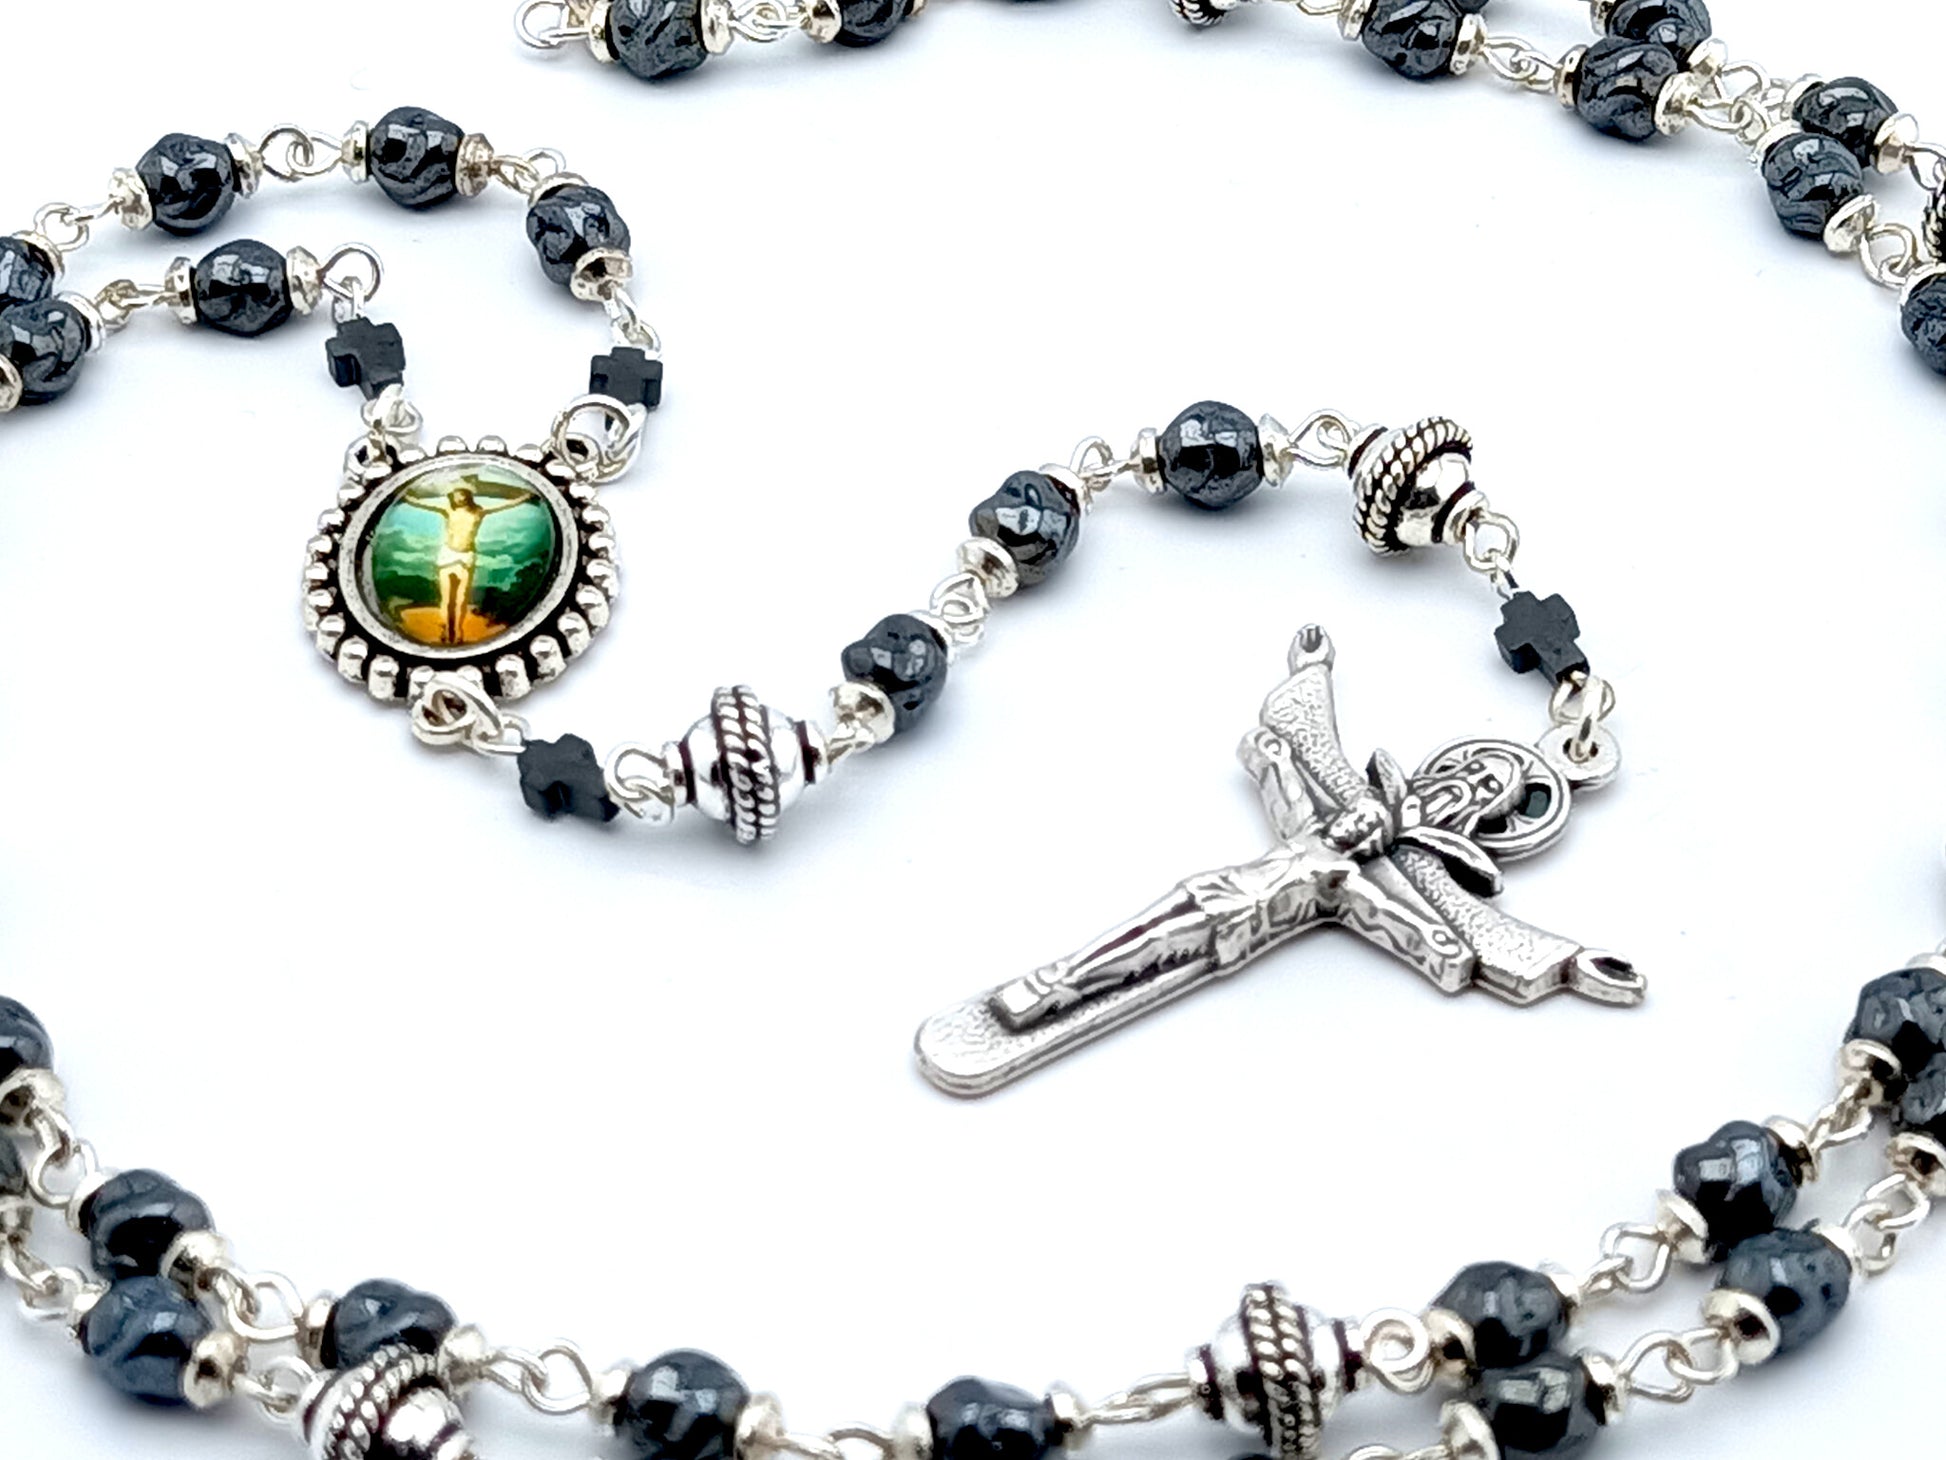 The Crucifixion unique rosary beads with dark grey nugget glass and silver beads, silver Trinity crucifix and picture centre medal.